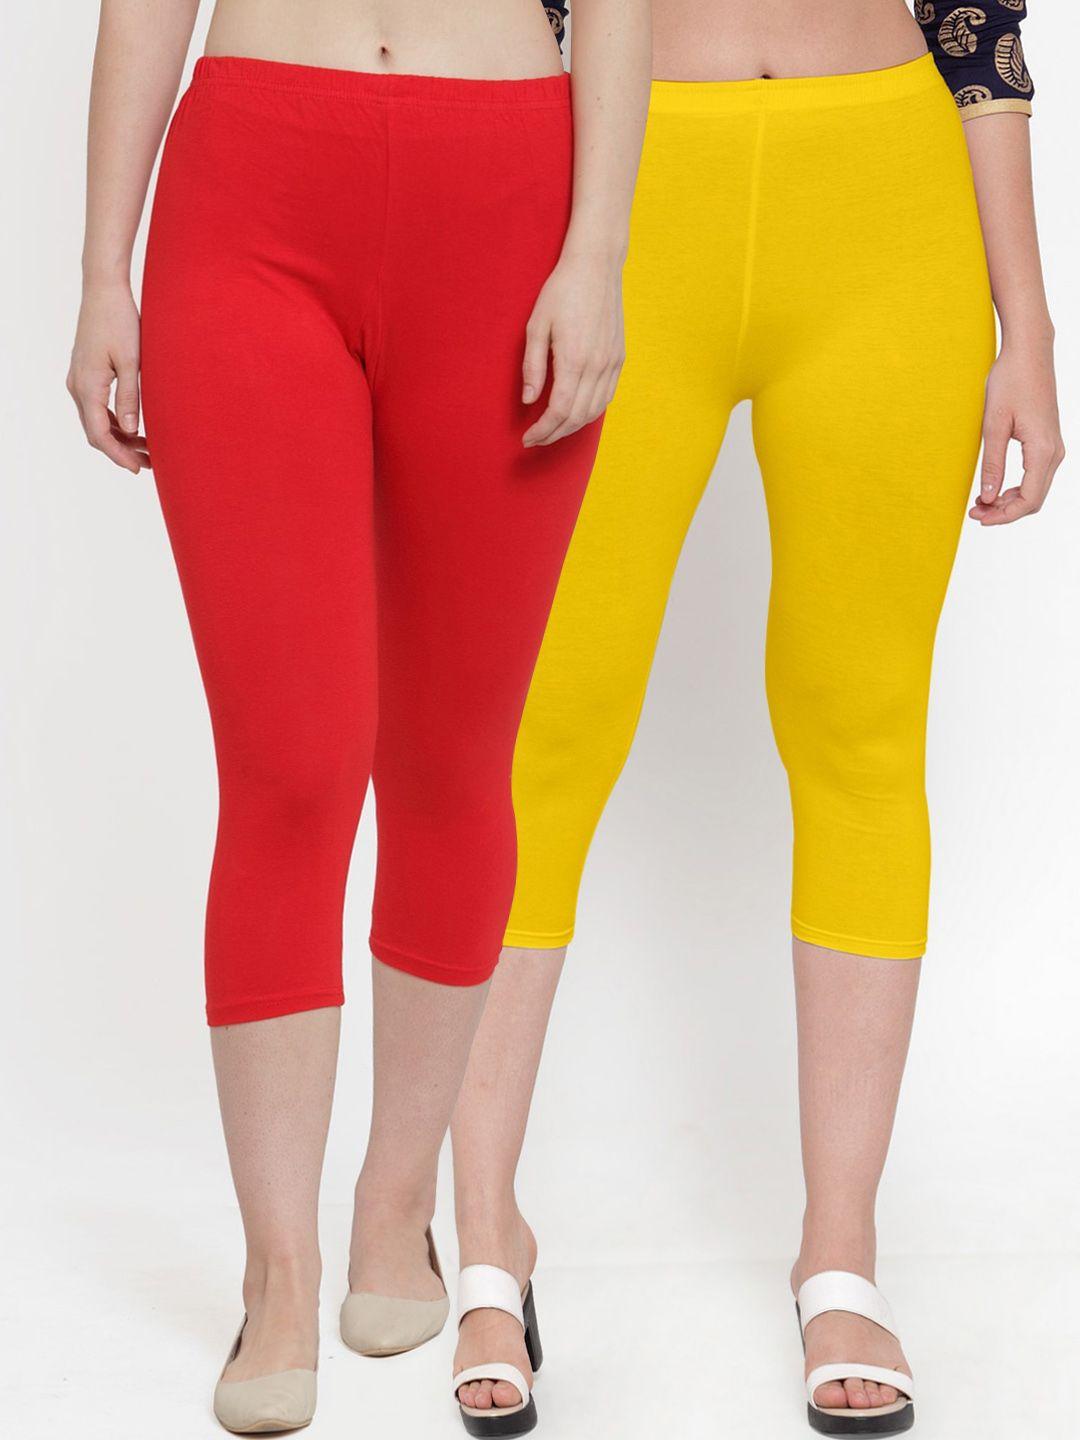 jinfo women pack of 2 red & yellow solid capris